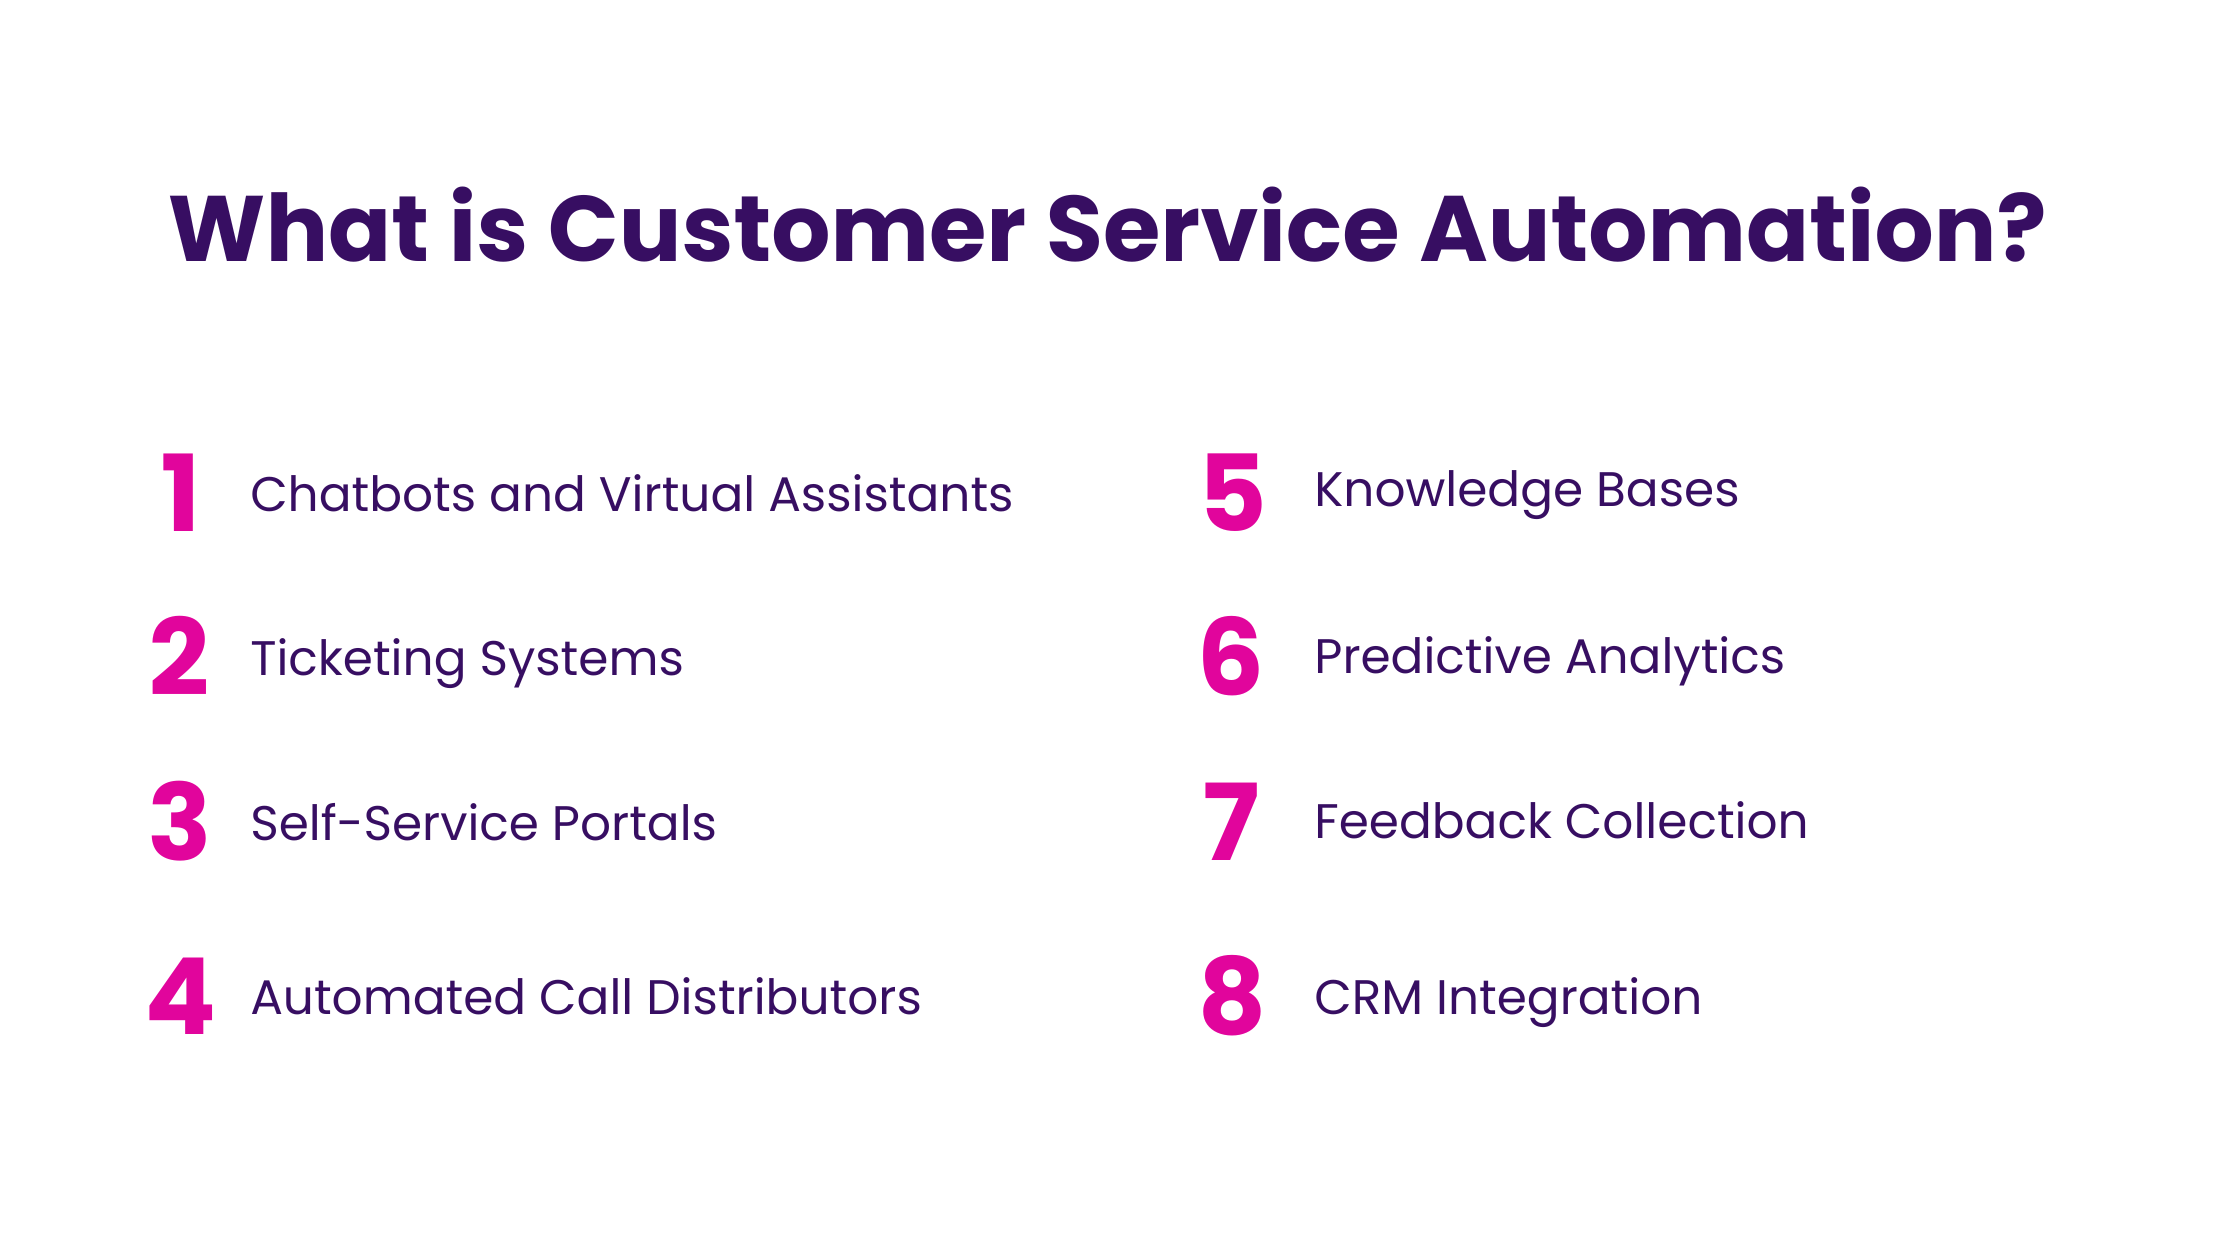 What is Customer Service Automation